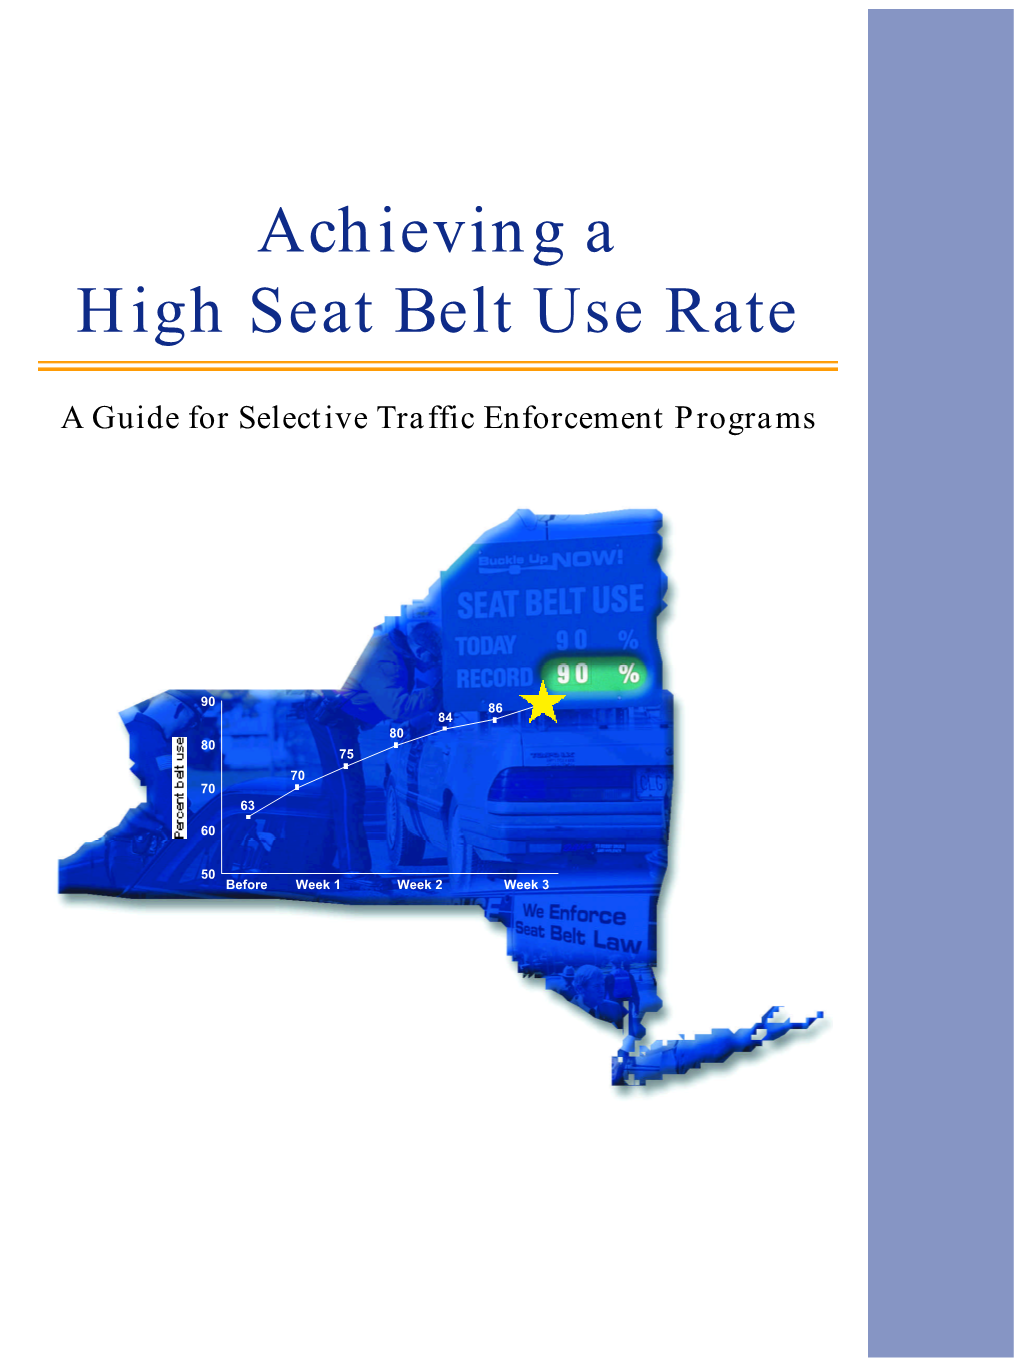 Achieving a High Seat Belt Use Rate